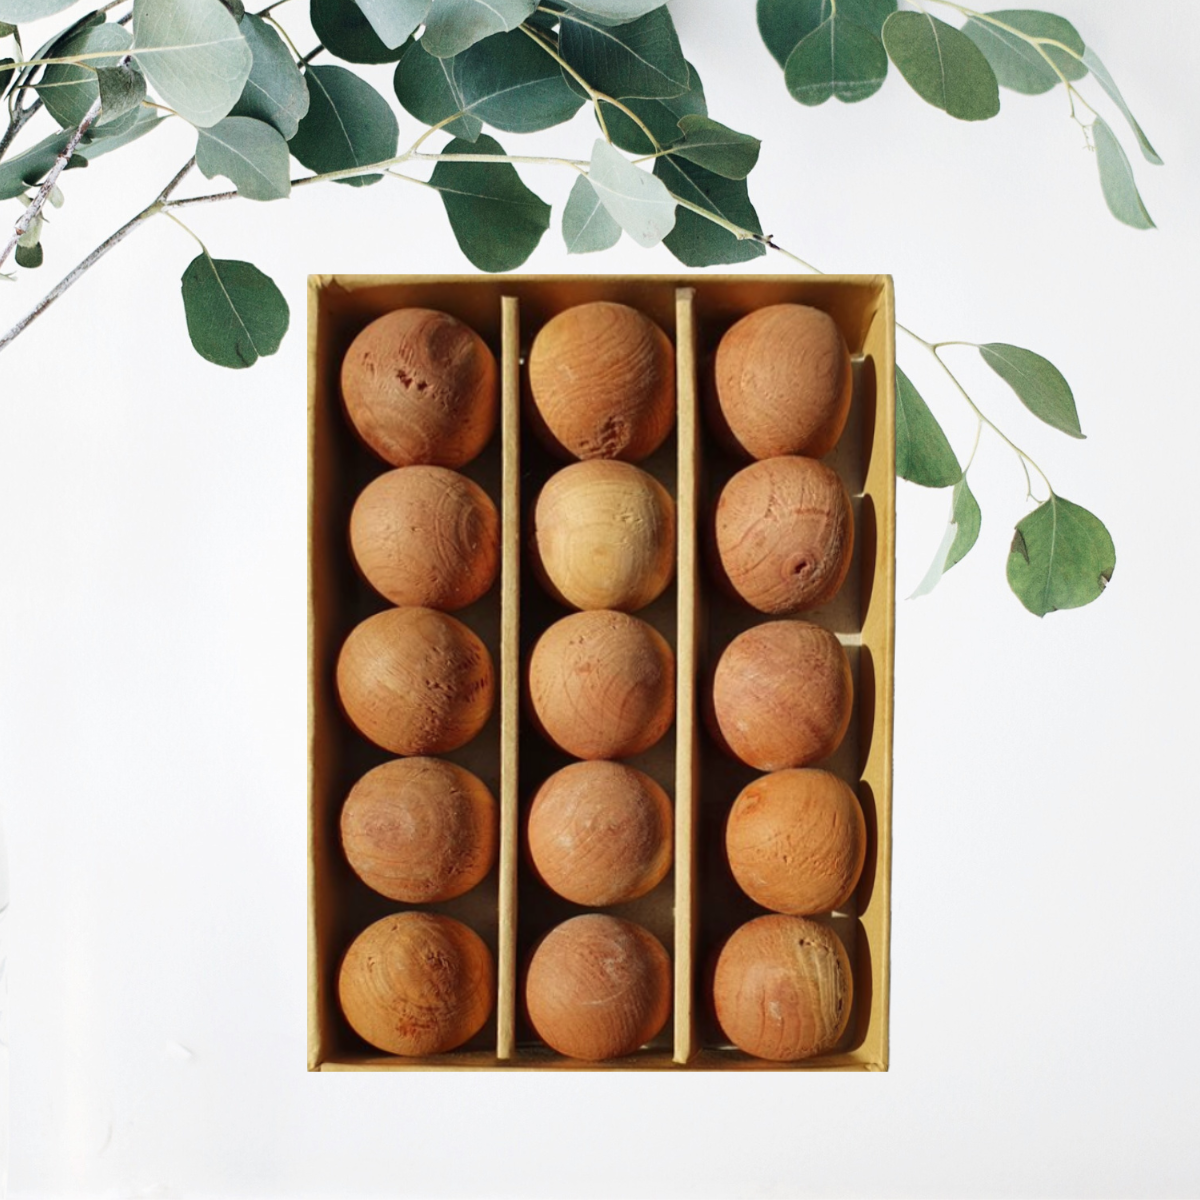 A pack of red cedar wood balls. Leaves in the background.